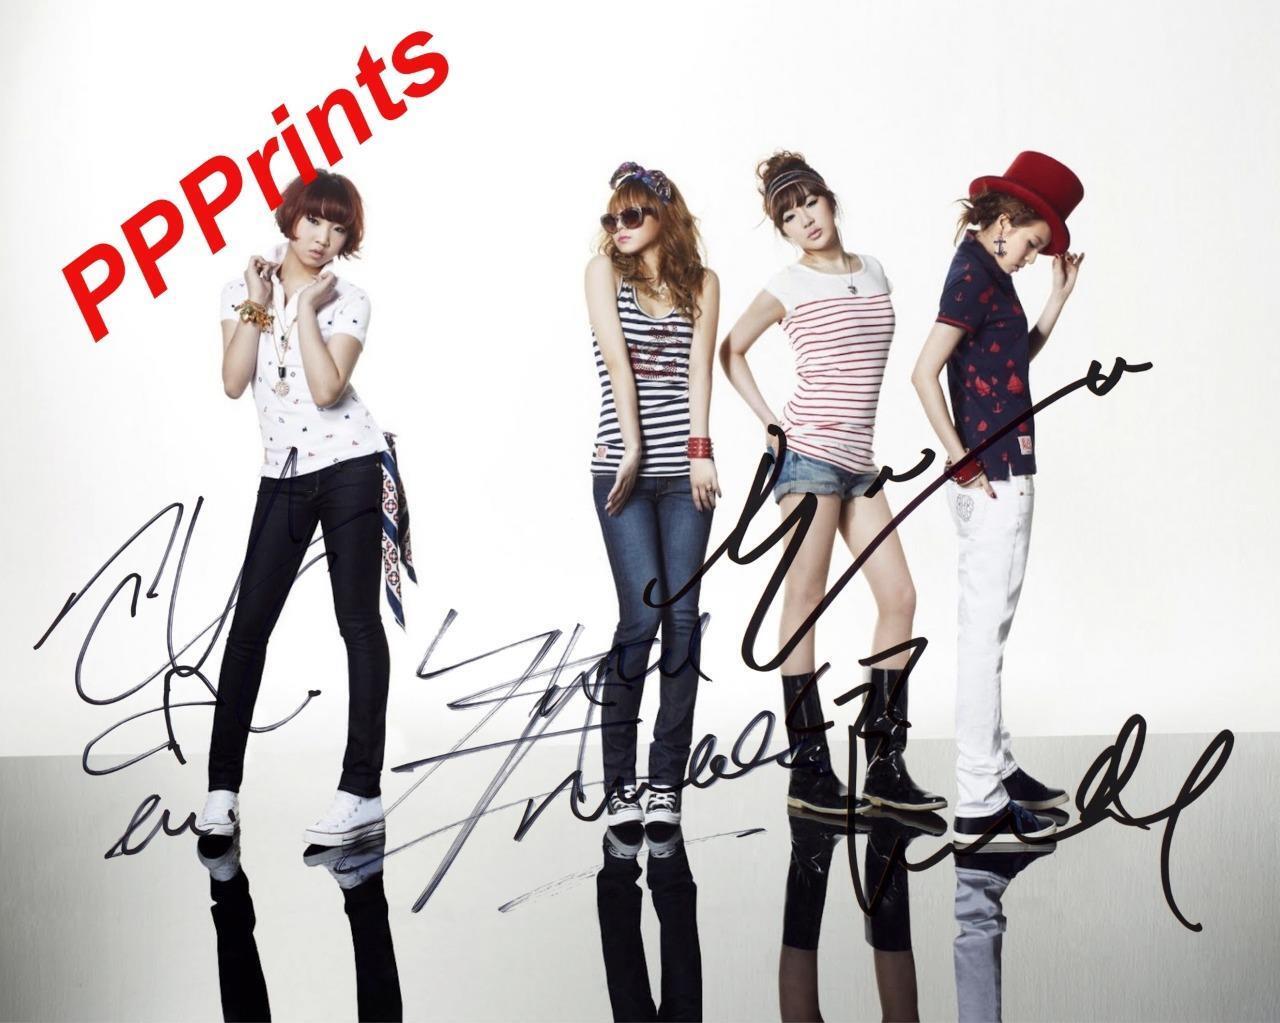 2NE1 SIGNED AUTOGRAPHED 10X8 REPRO Photo Poster painting PRINT CL, BOM, DARA & MINZY